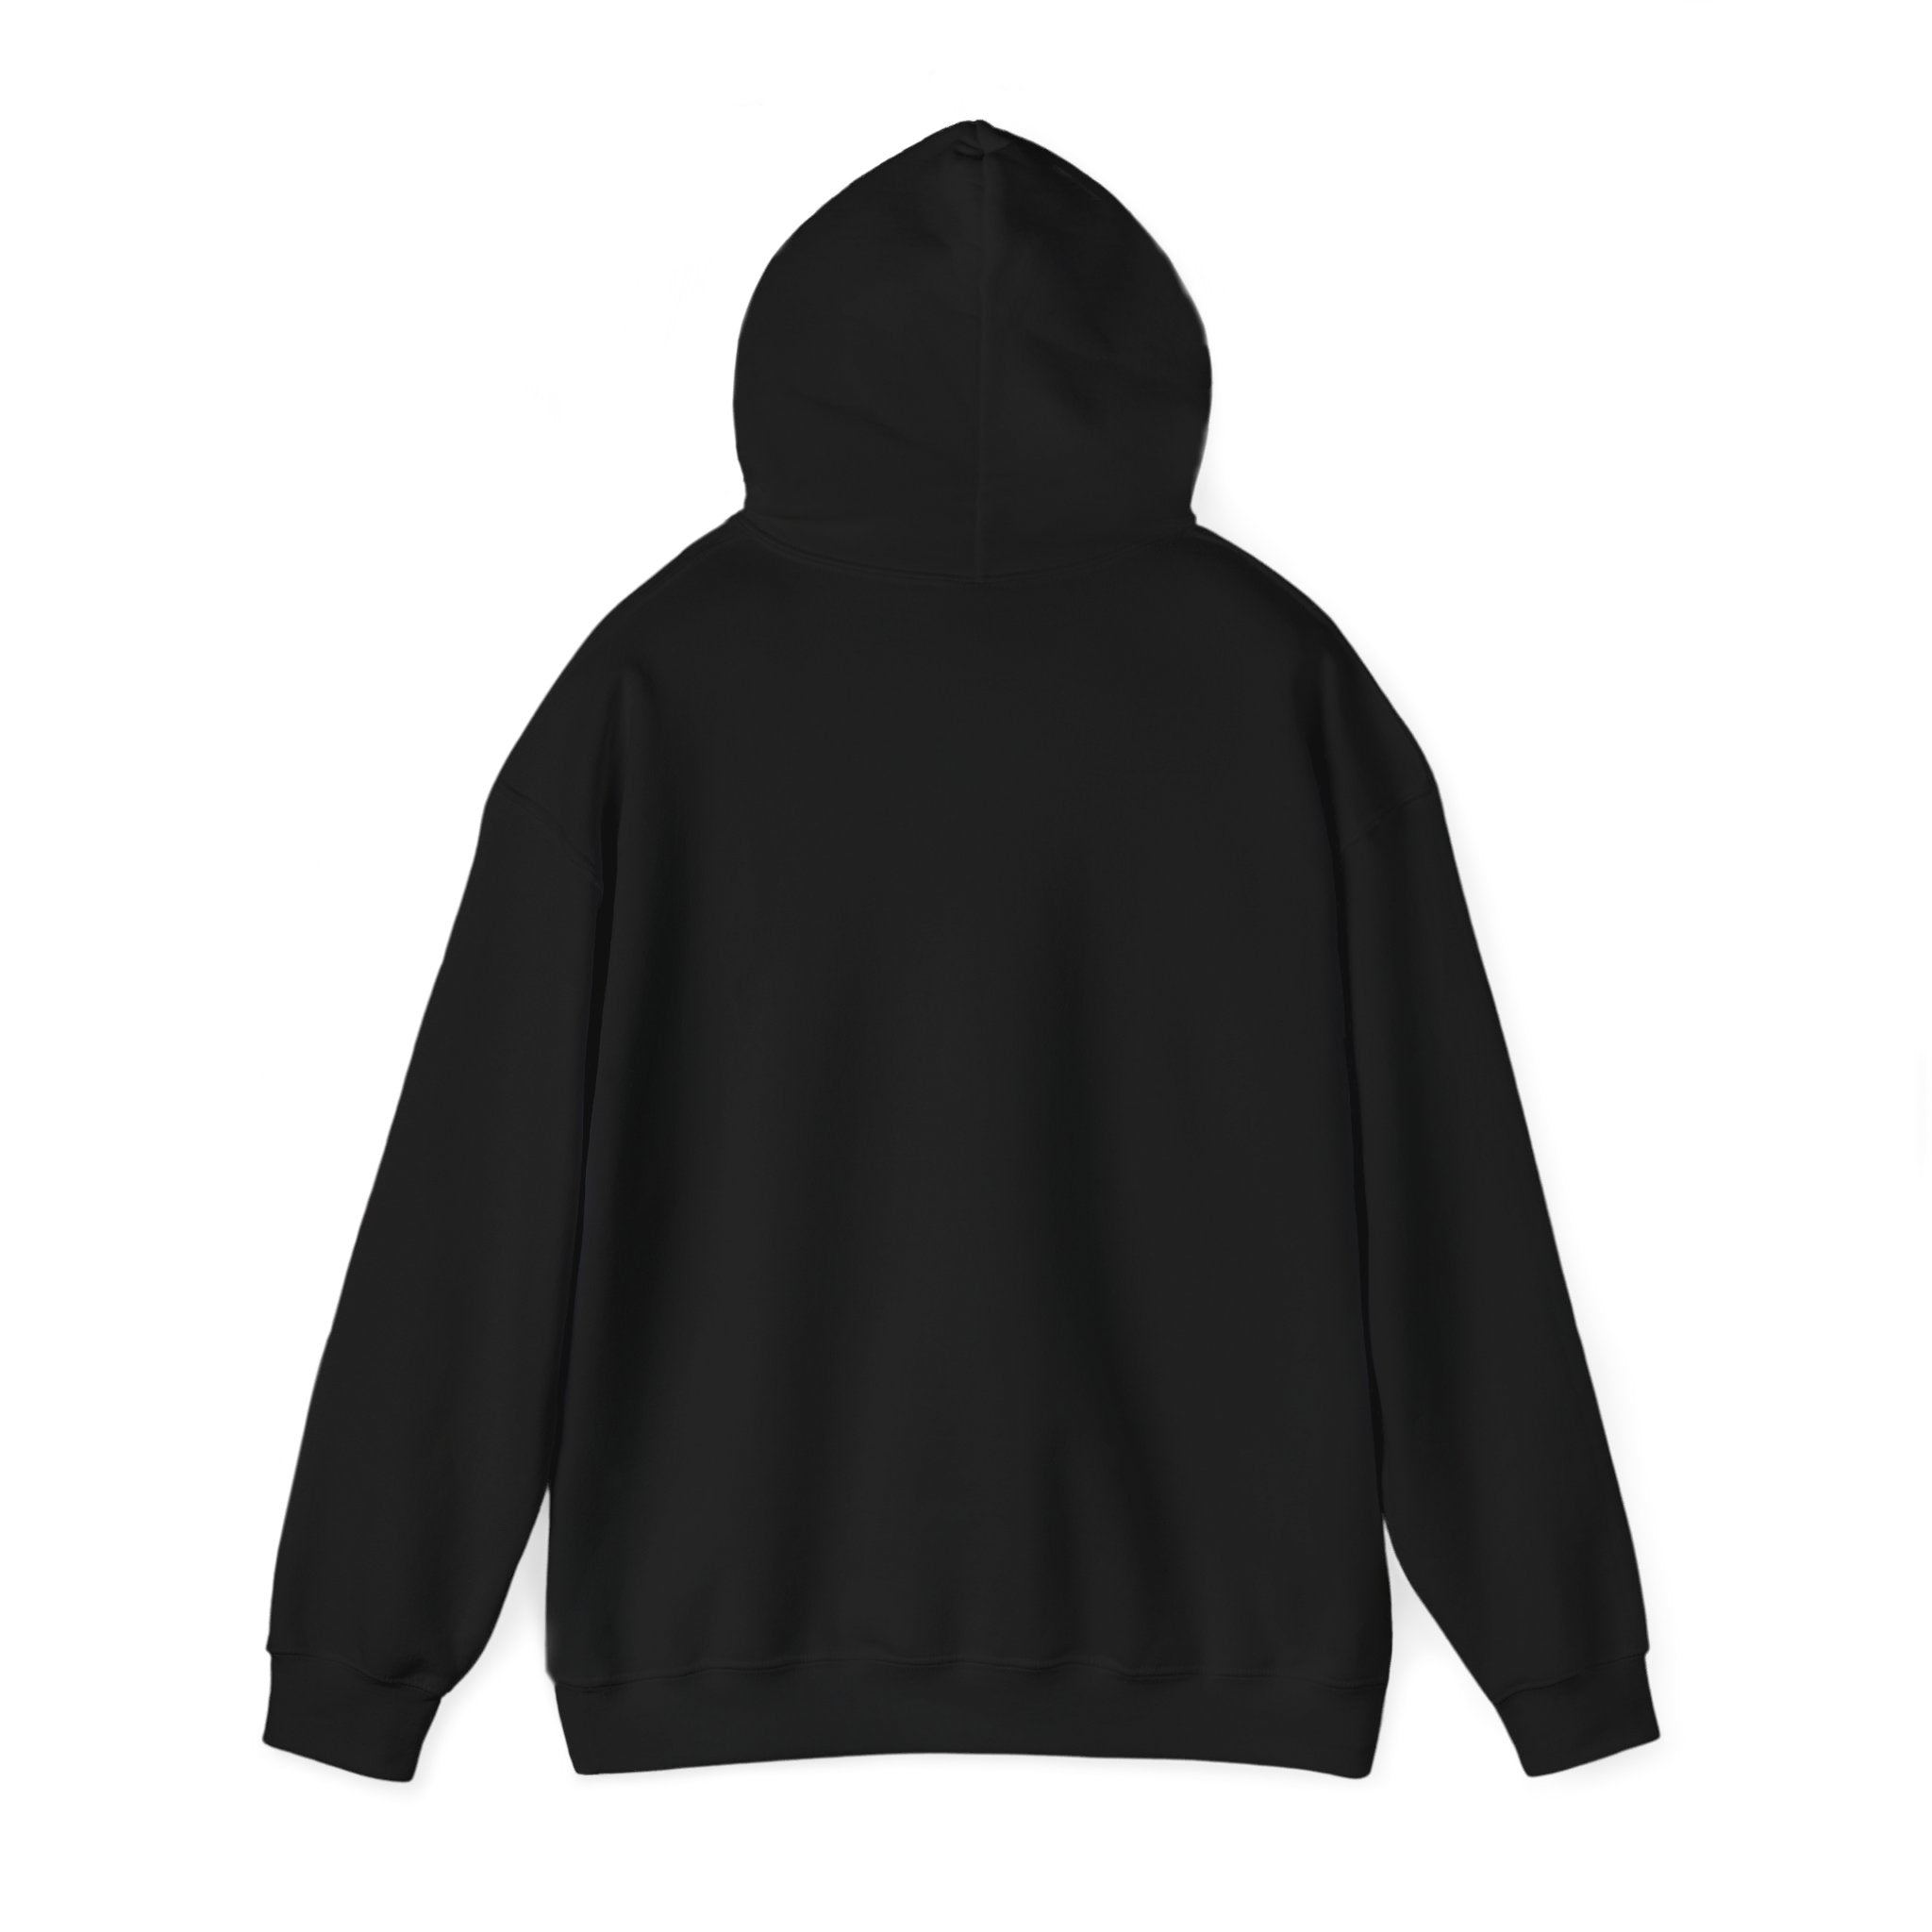 A black RU - Hooded Sweatshirt is displayed from the back, showcasing a plain, unadorned surface with long sleeves and a hood. This piece effortlessly combines style and ease for ultimate comfort.